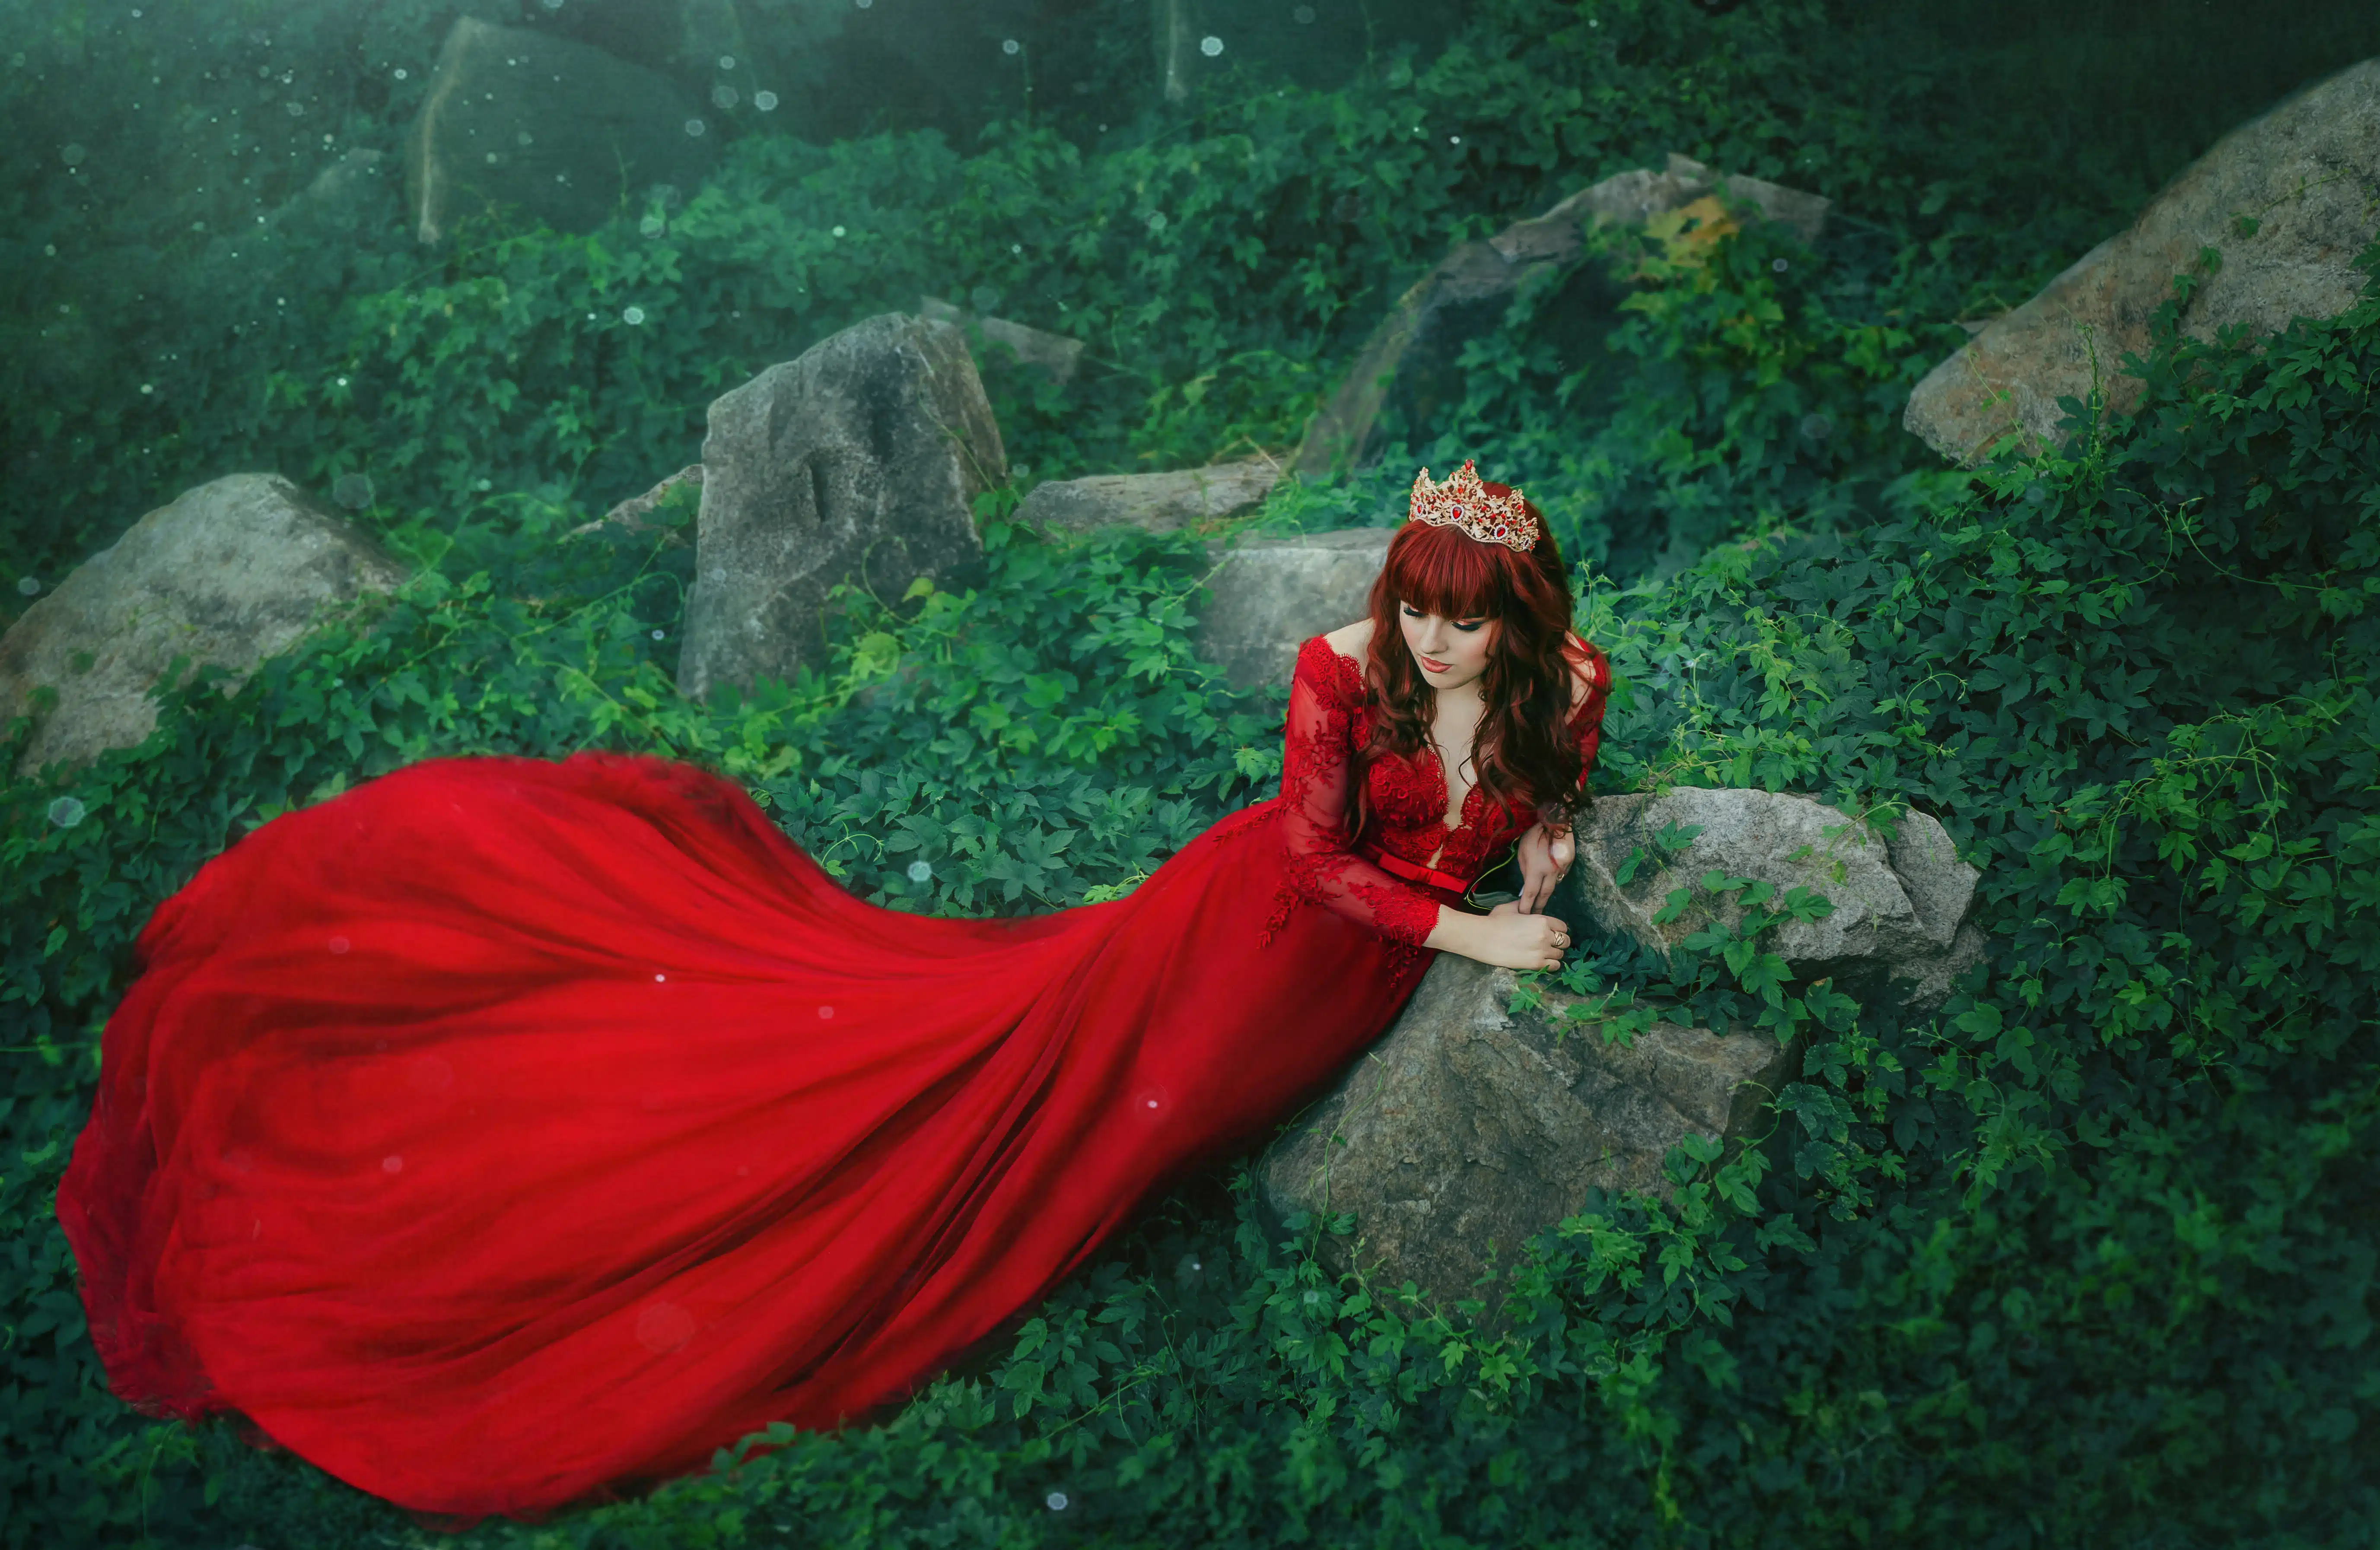 The Queen in a luxurious, expensive, red dress, with a long train lies on the thickets of ivy.